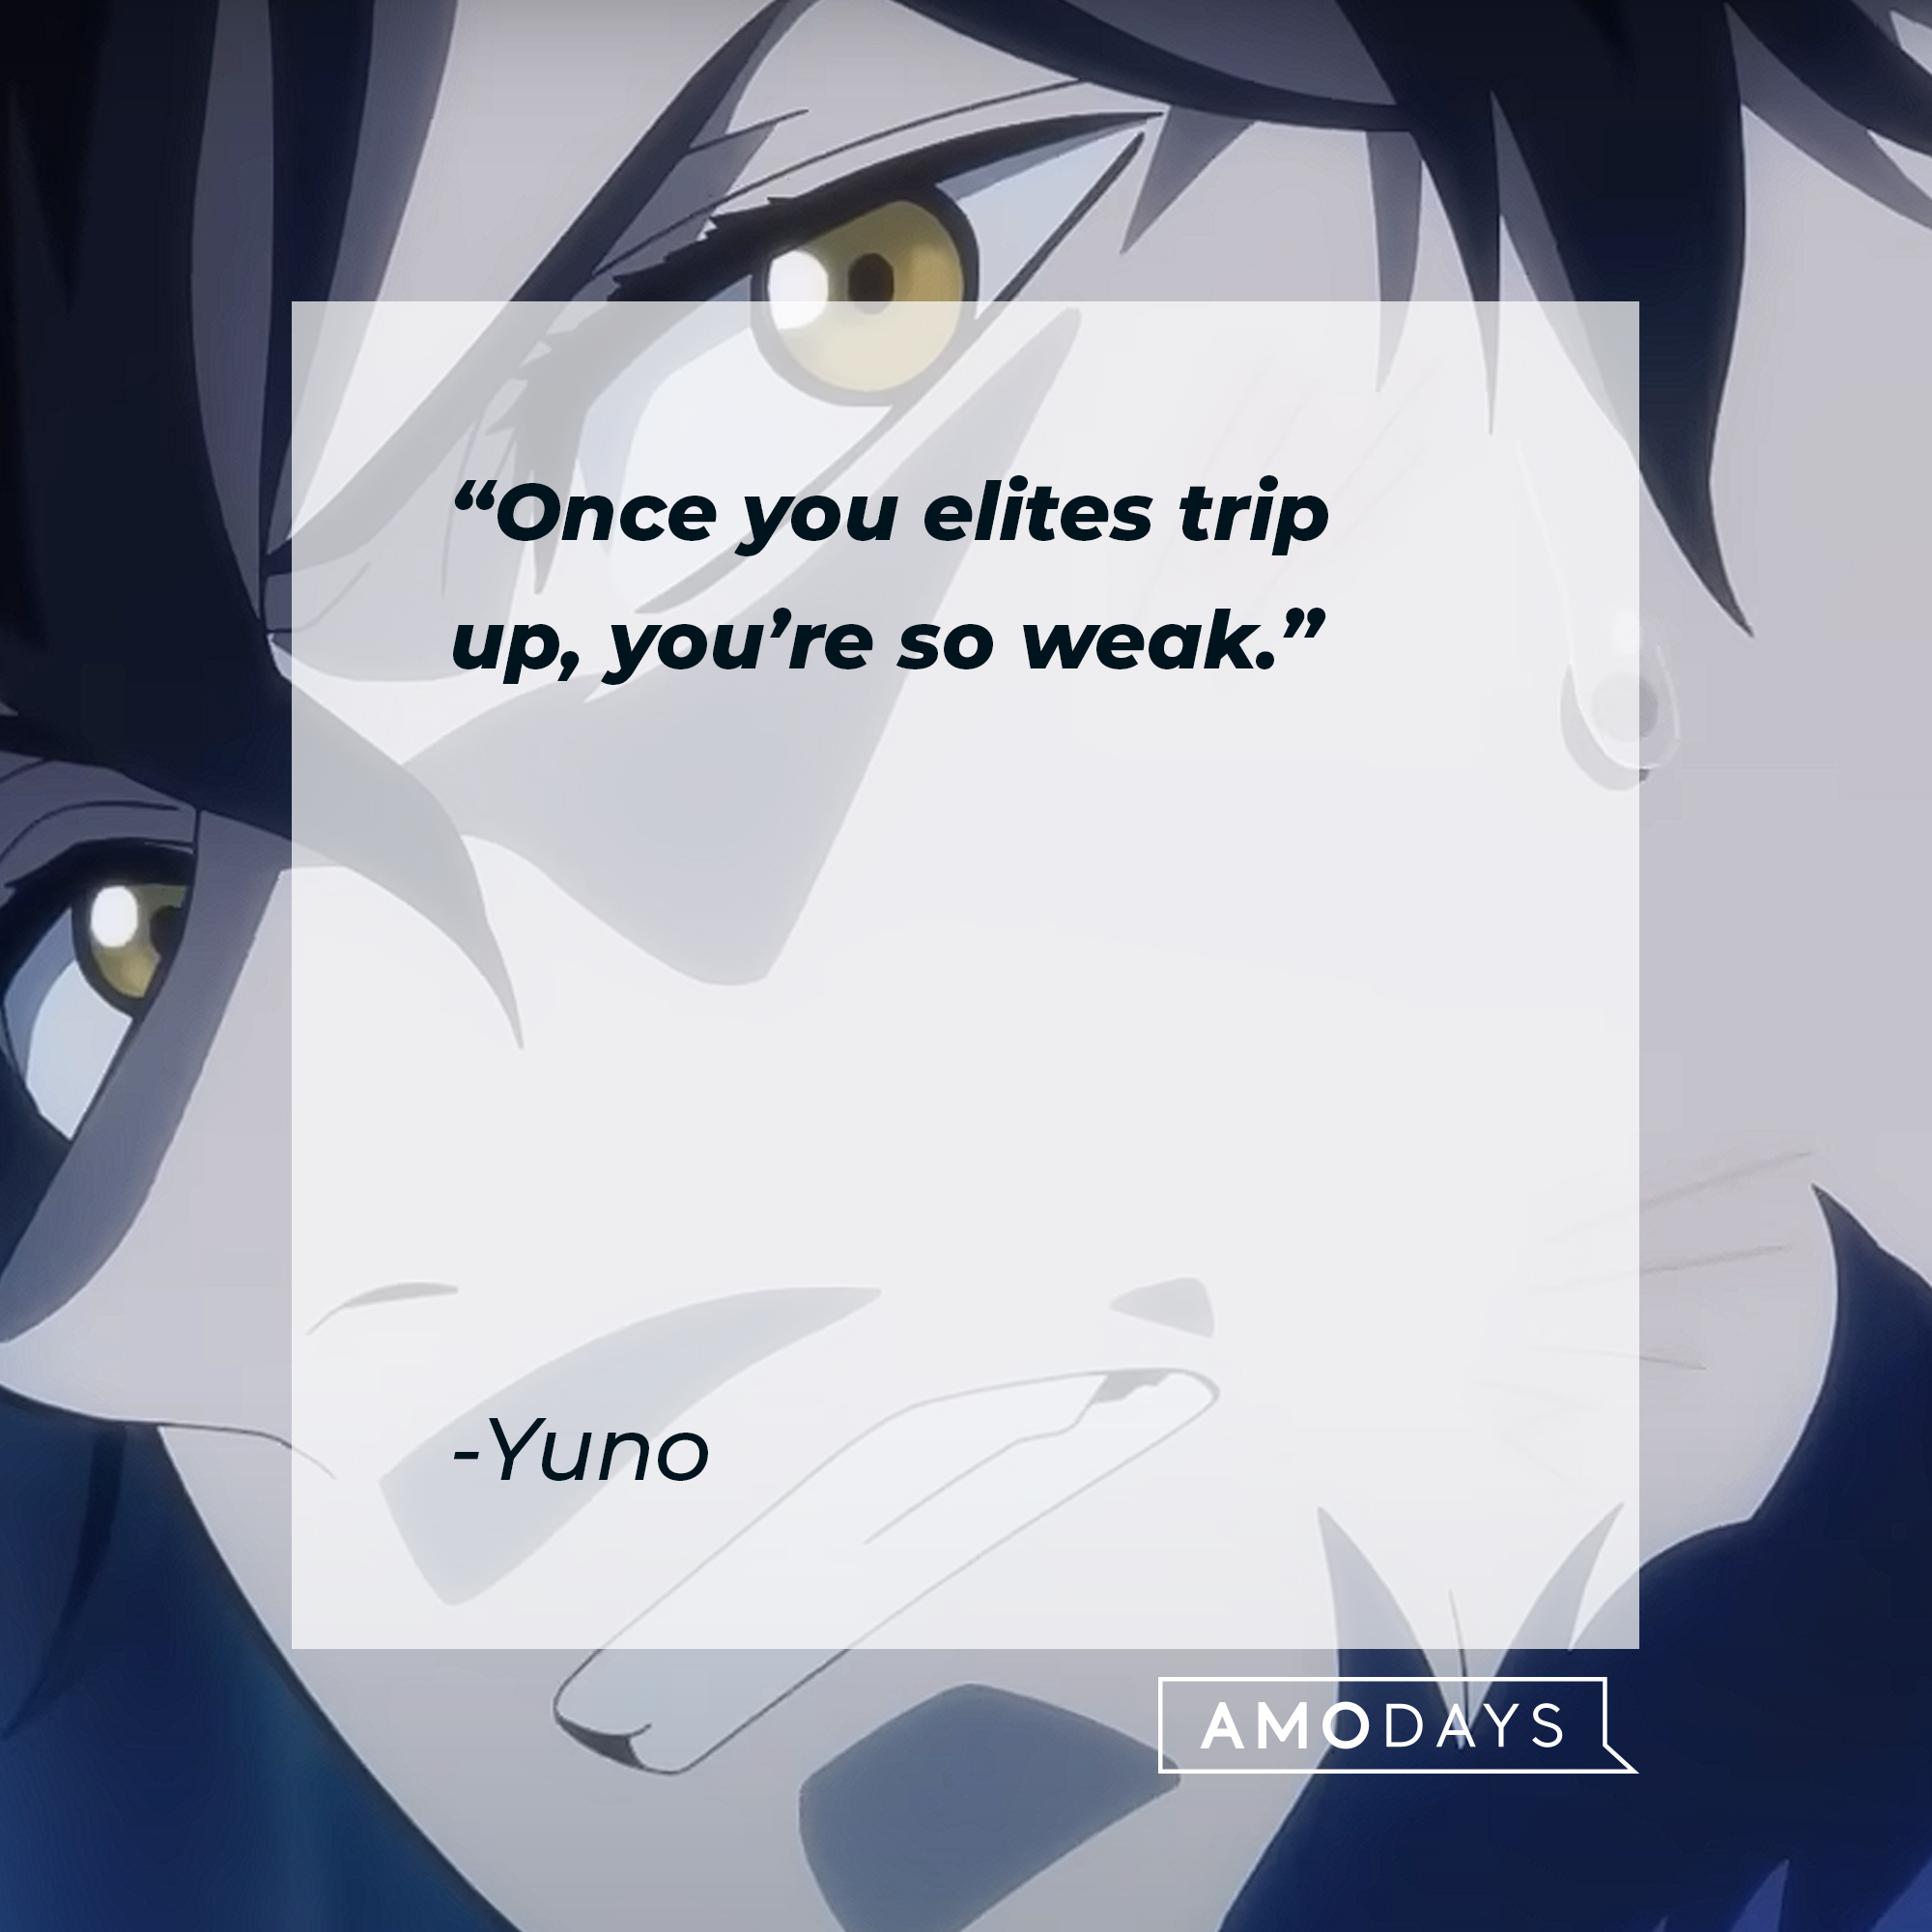 An image of Yuno with his quote: “Once you elites trip up, you’re so weak.” | Source: youtube/netflixanime